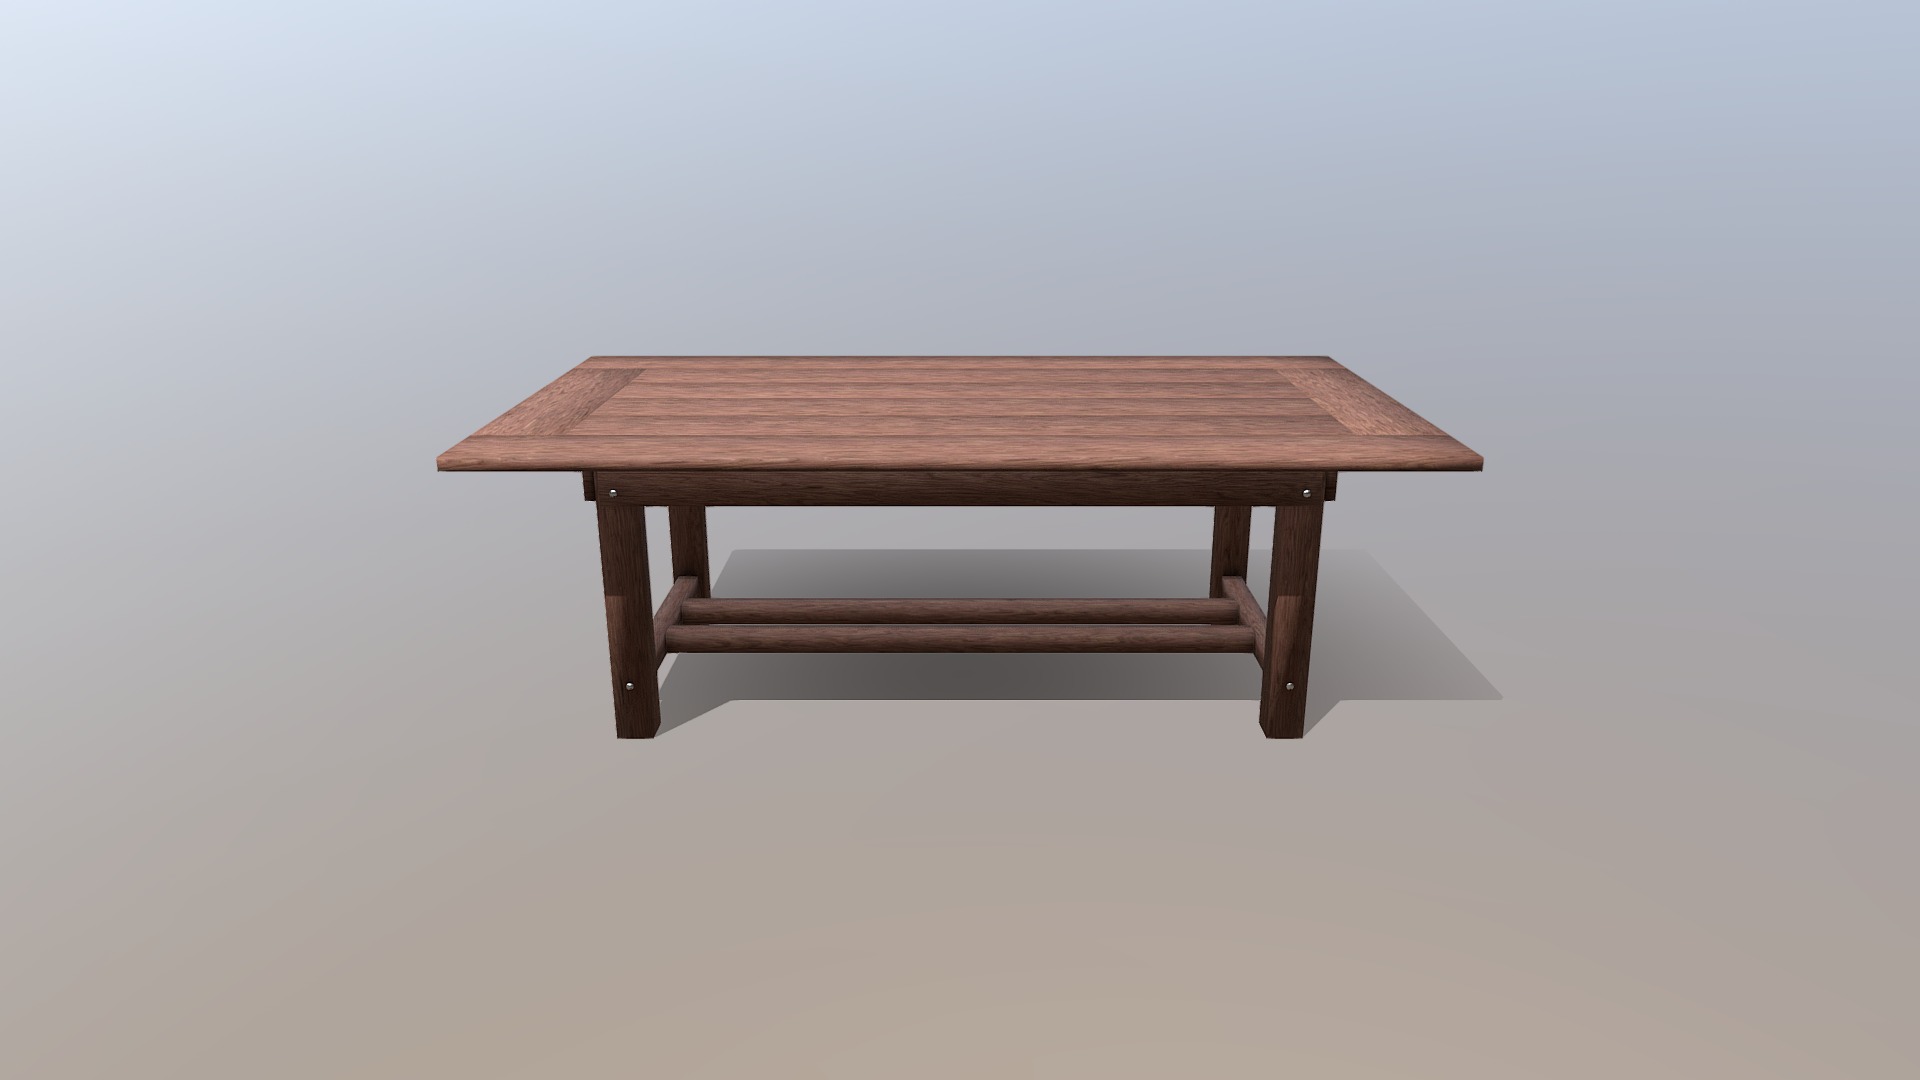 3D model Dark Wood Dining Room Table - This is a 3D model of the Dark Wood Dining Room Table. The 3D model is about a wooden table with a white background.